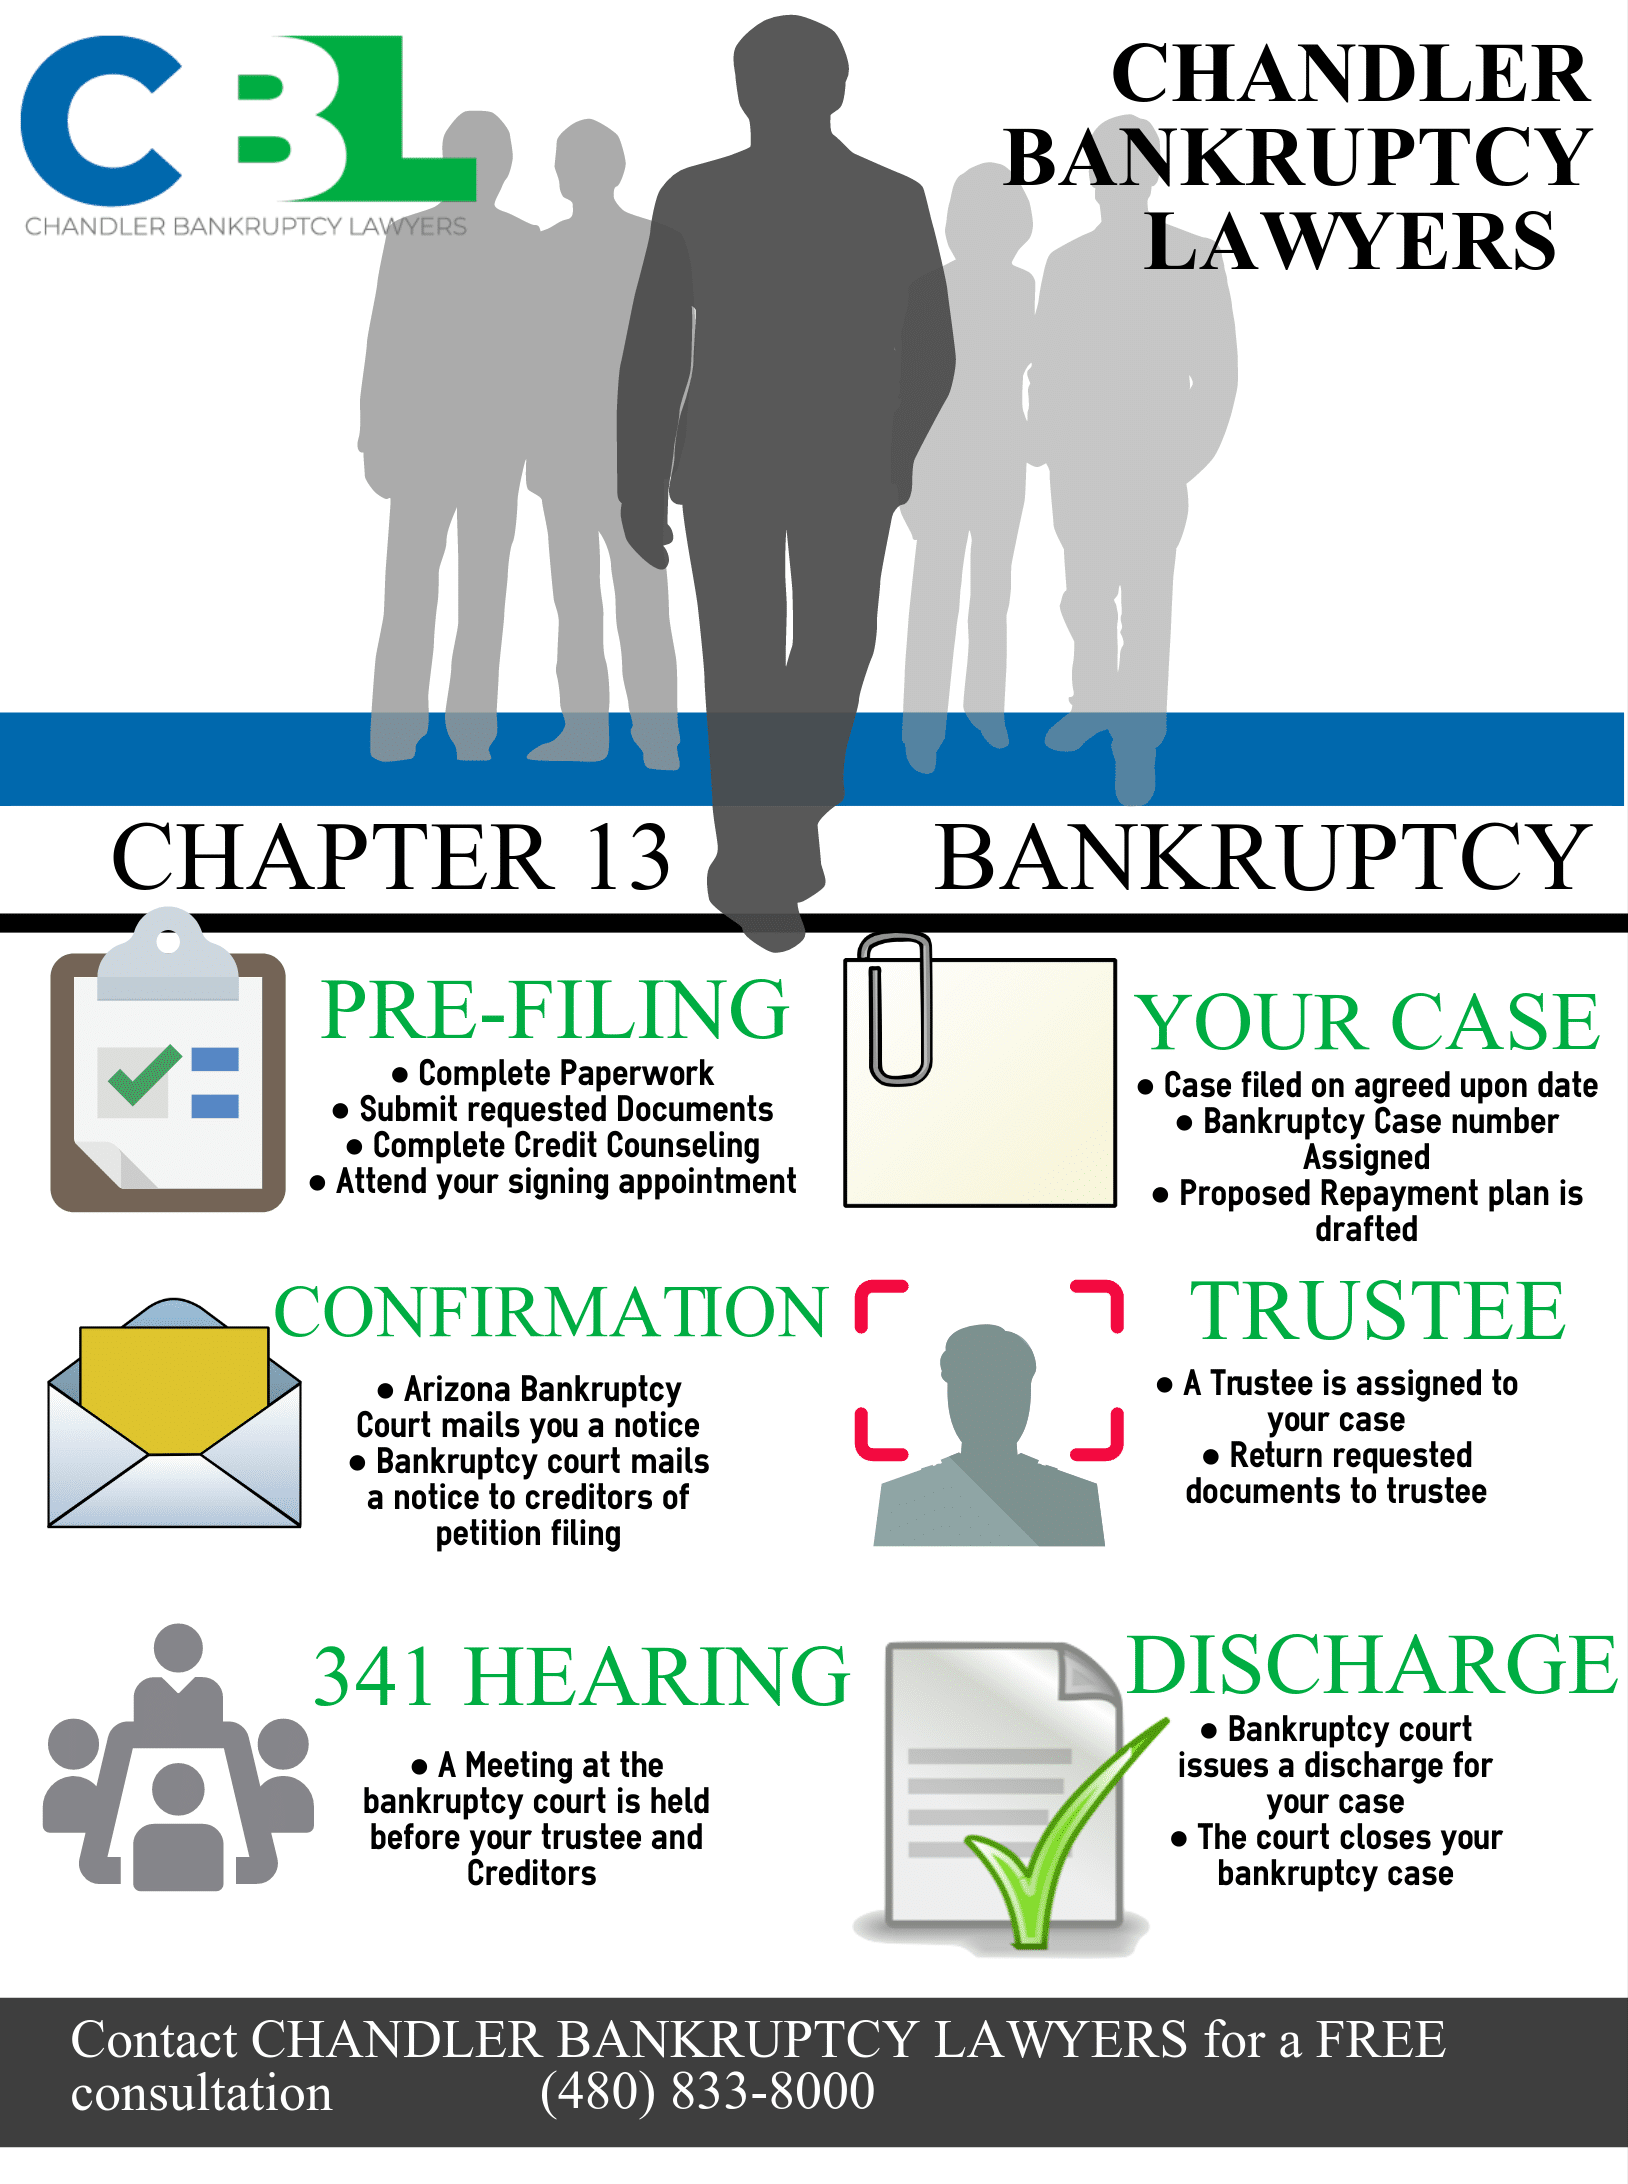 Chapter 13 bankruptcy attorney in Chandler infographic